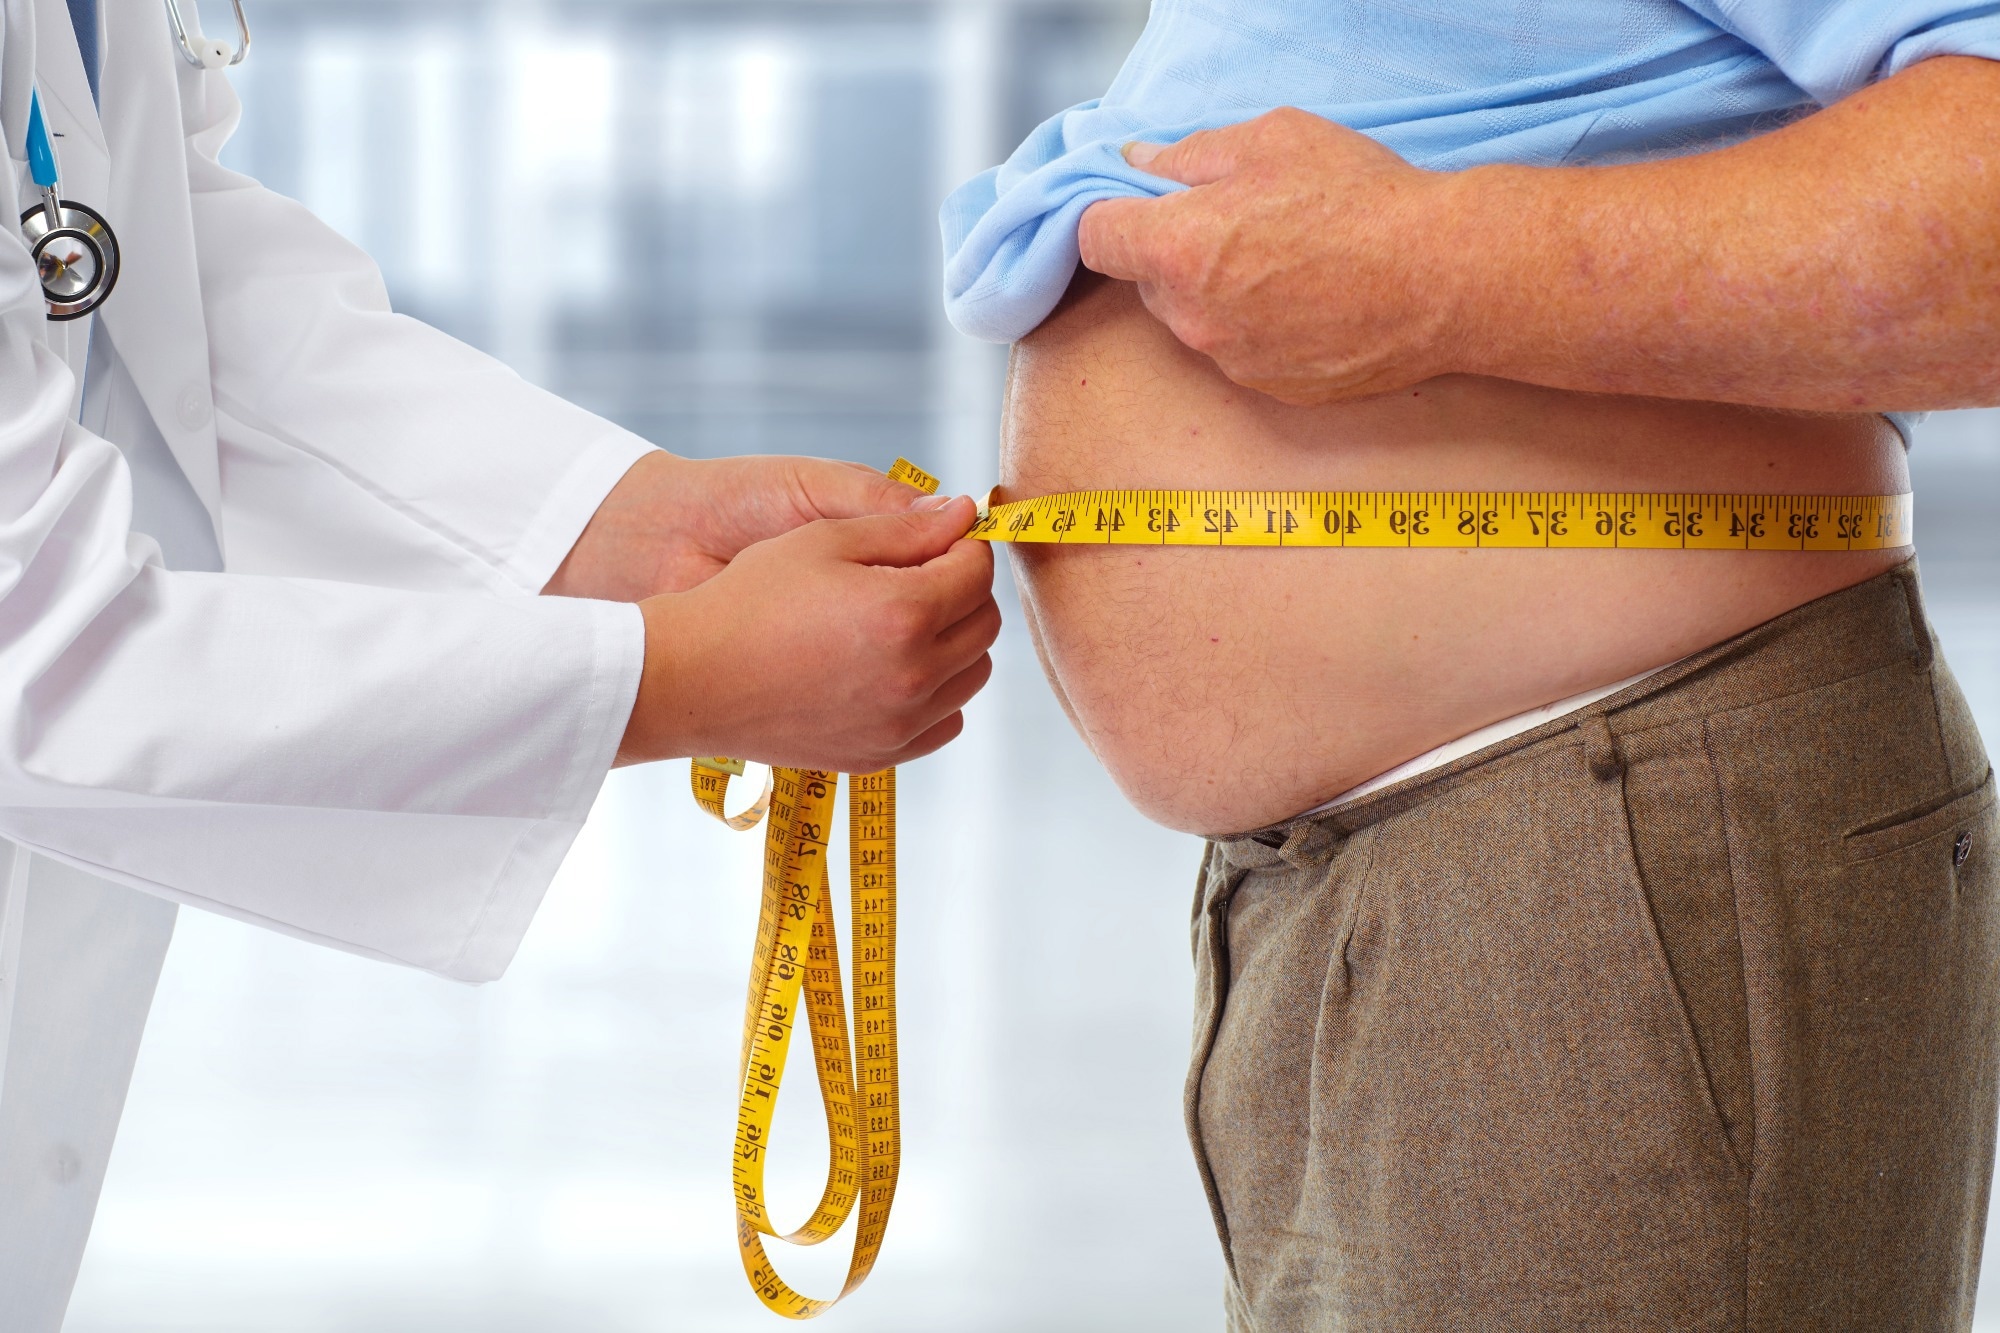 Obesity strikes below the belt: Study reveals link between obesity and male infertility